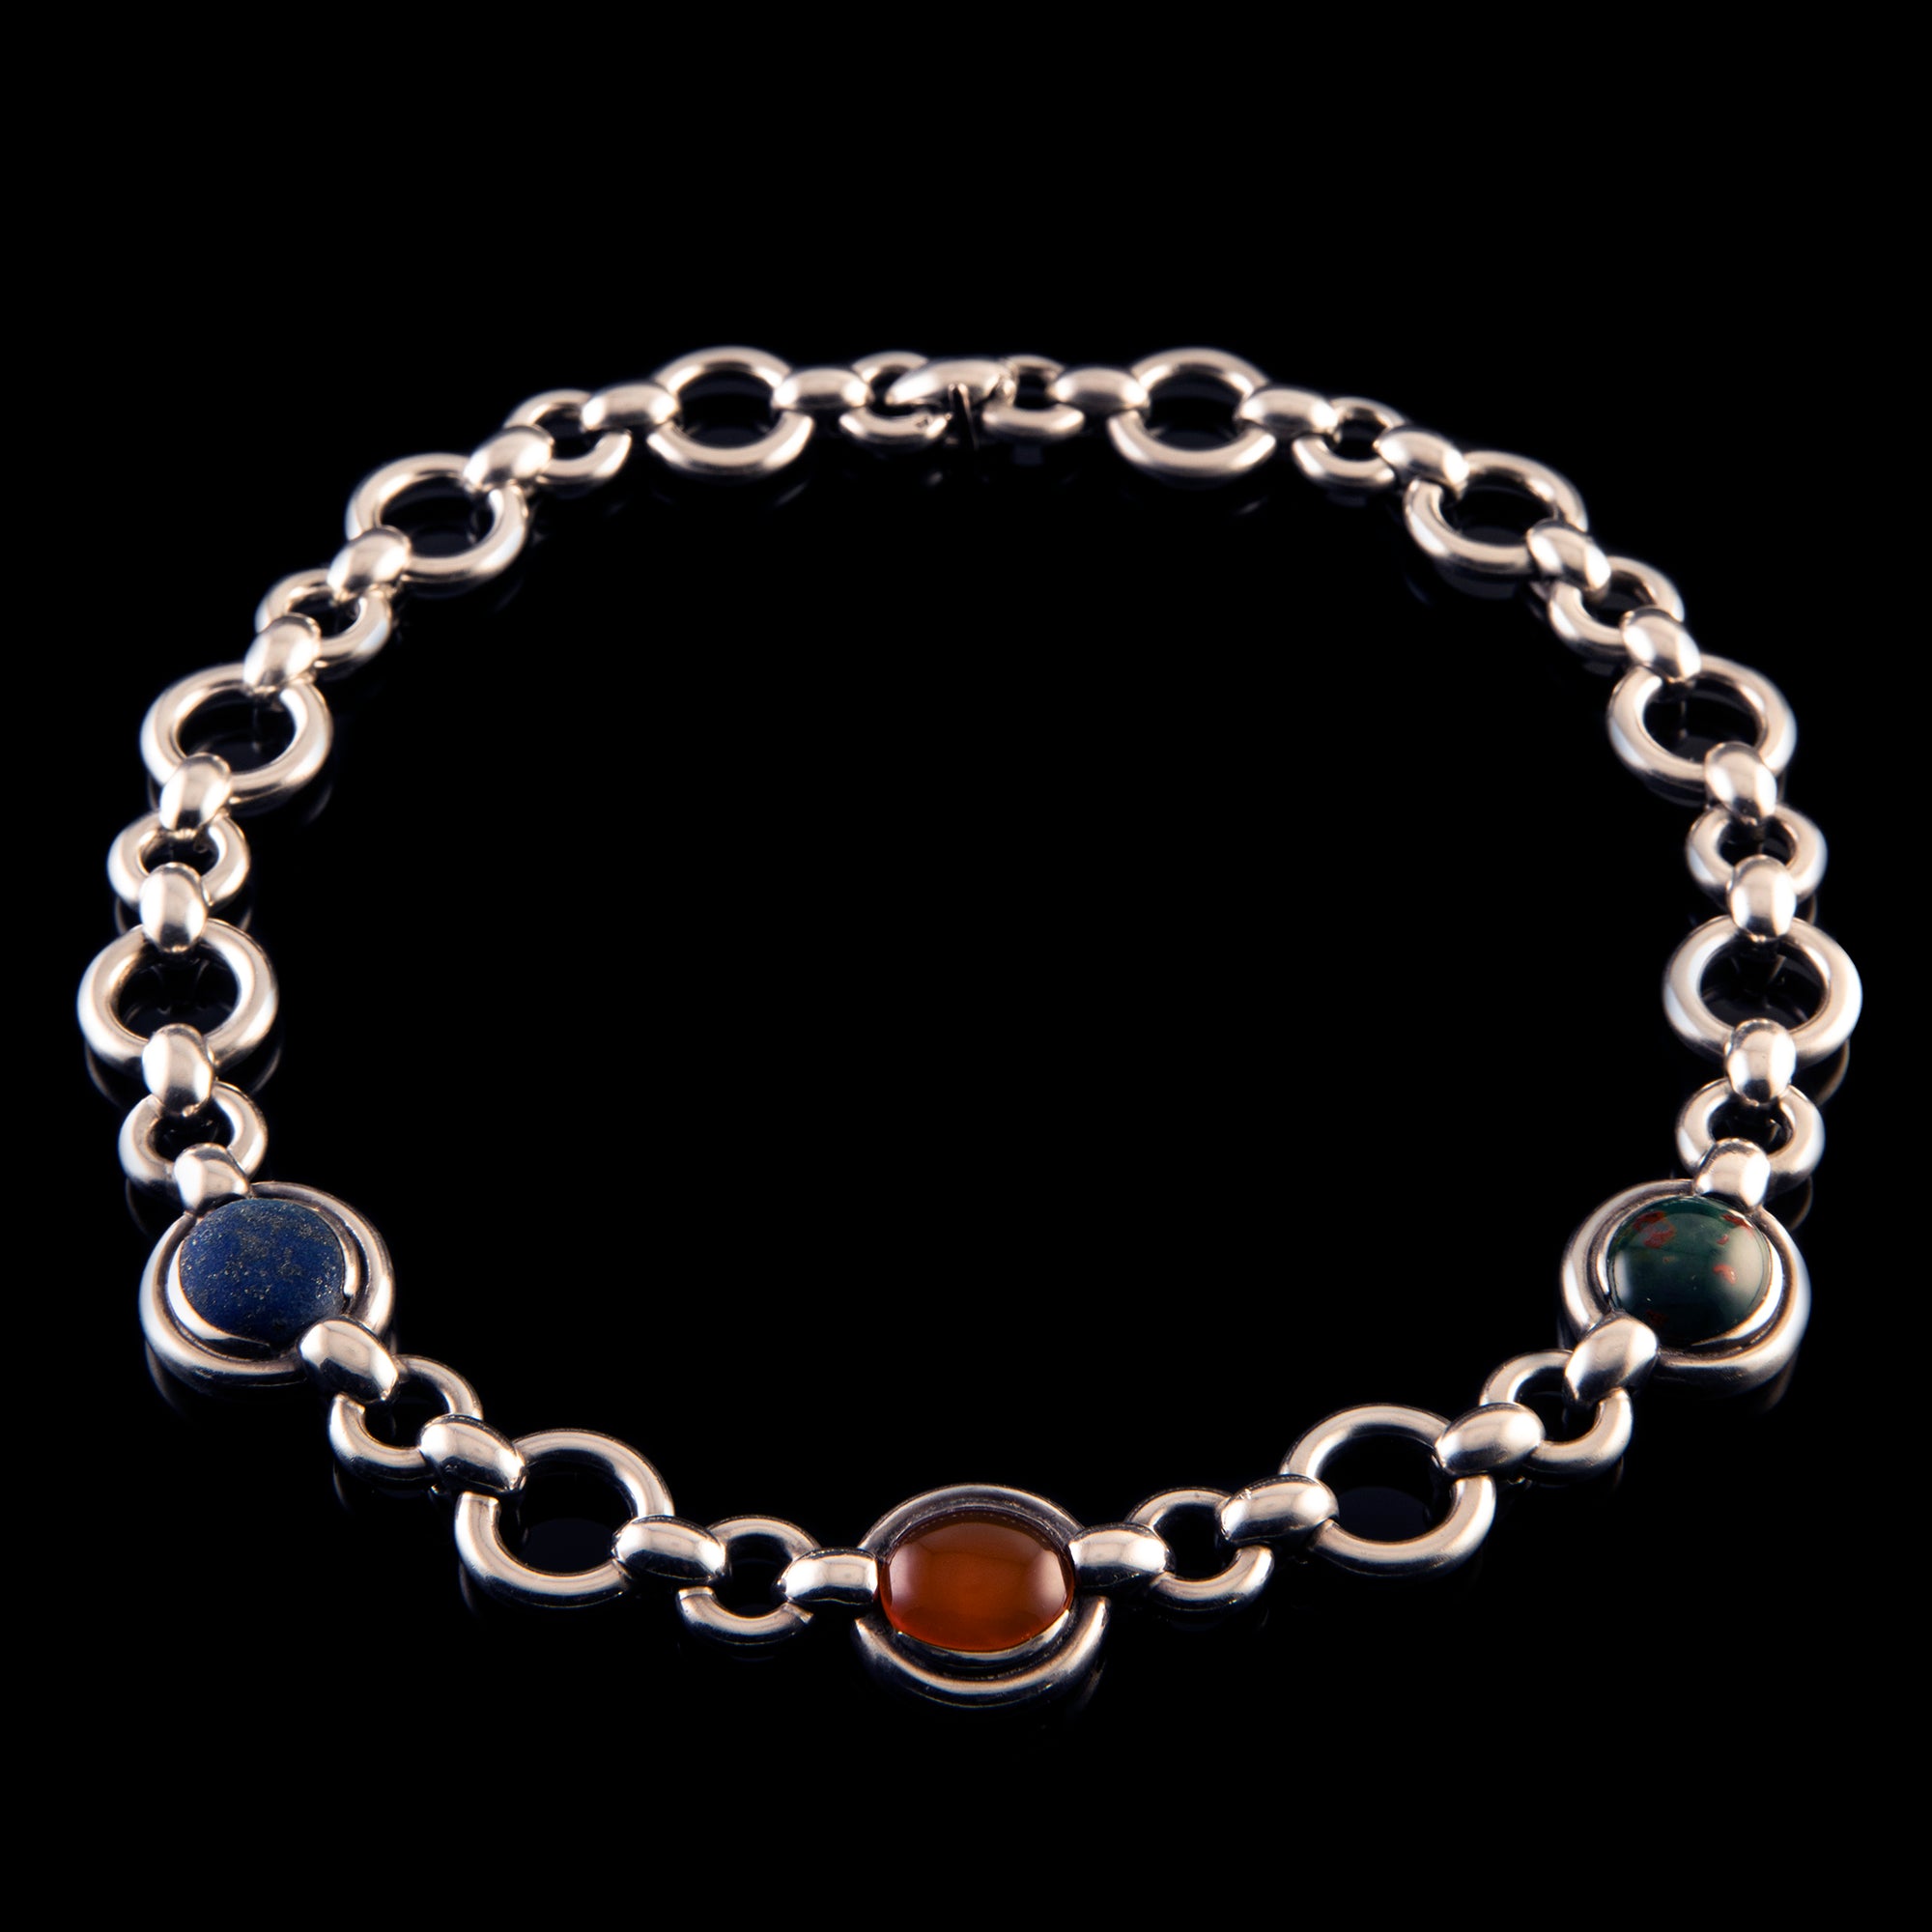 Hermès Silver Collier with "Cabochon" stones